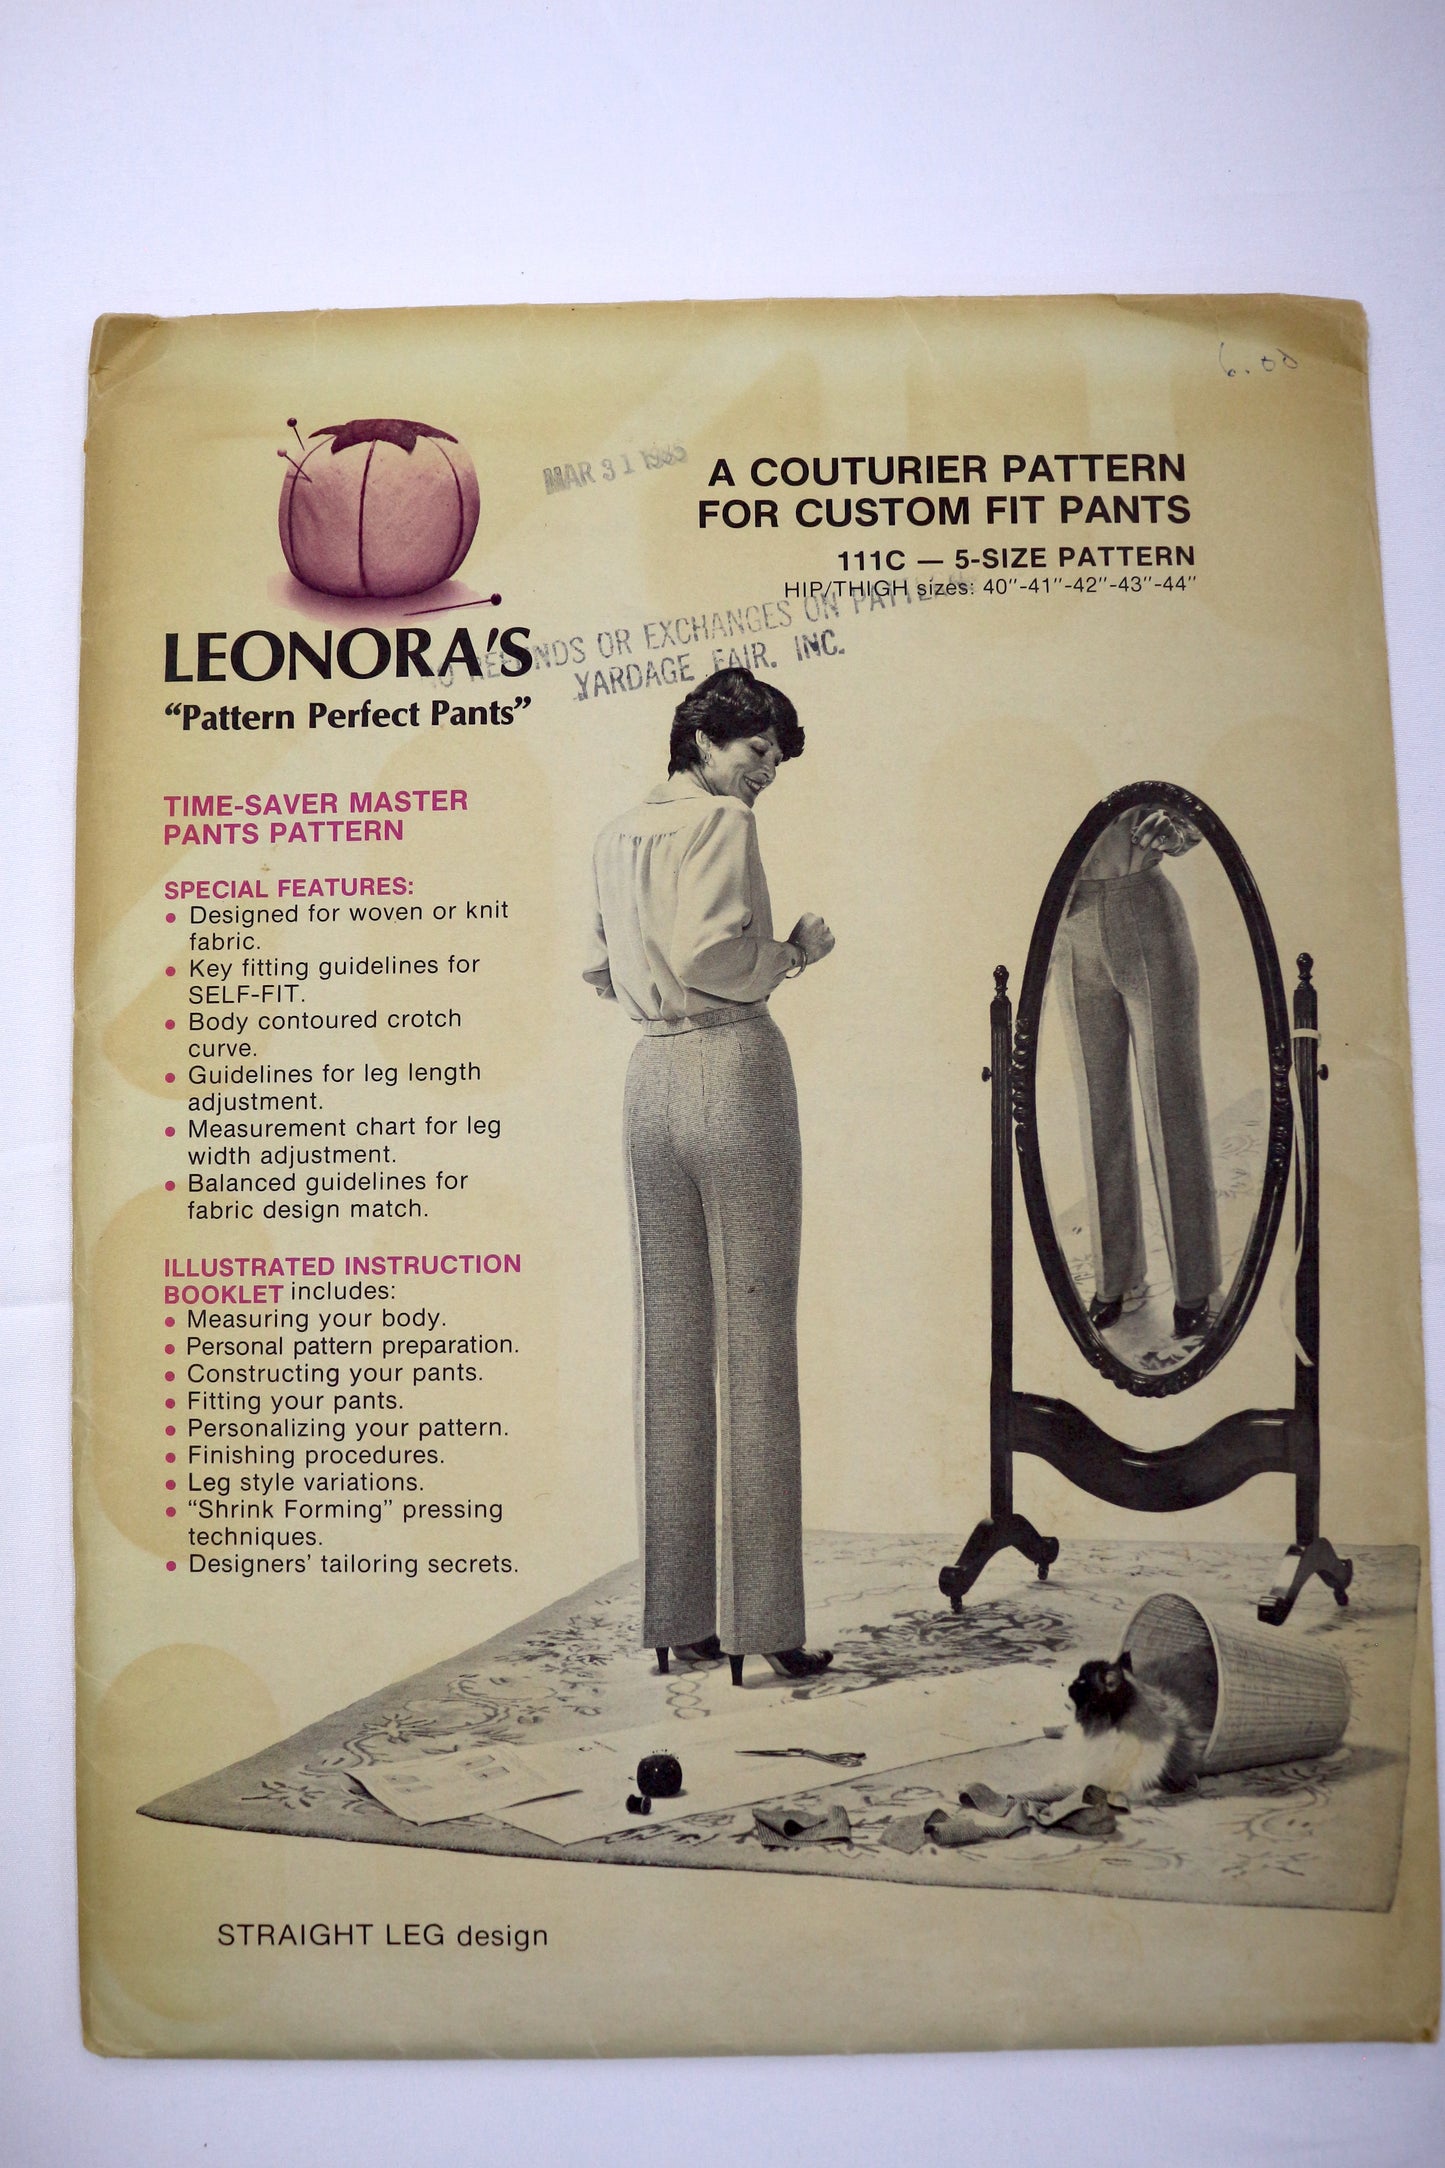 Leonoras Pattern Perfect Pants  A Couturier Pattern for Custom Fit Pants